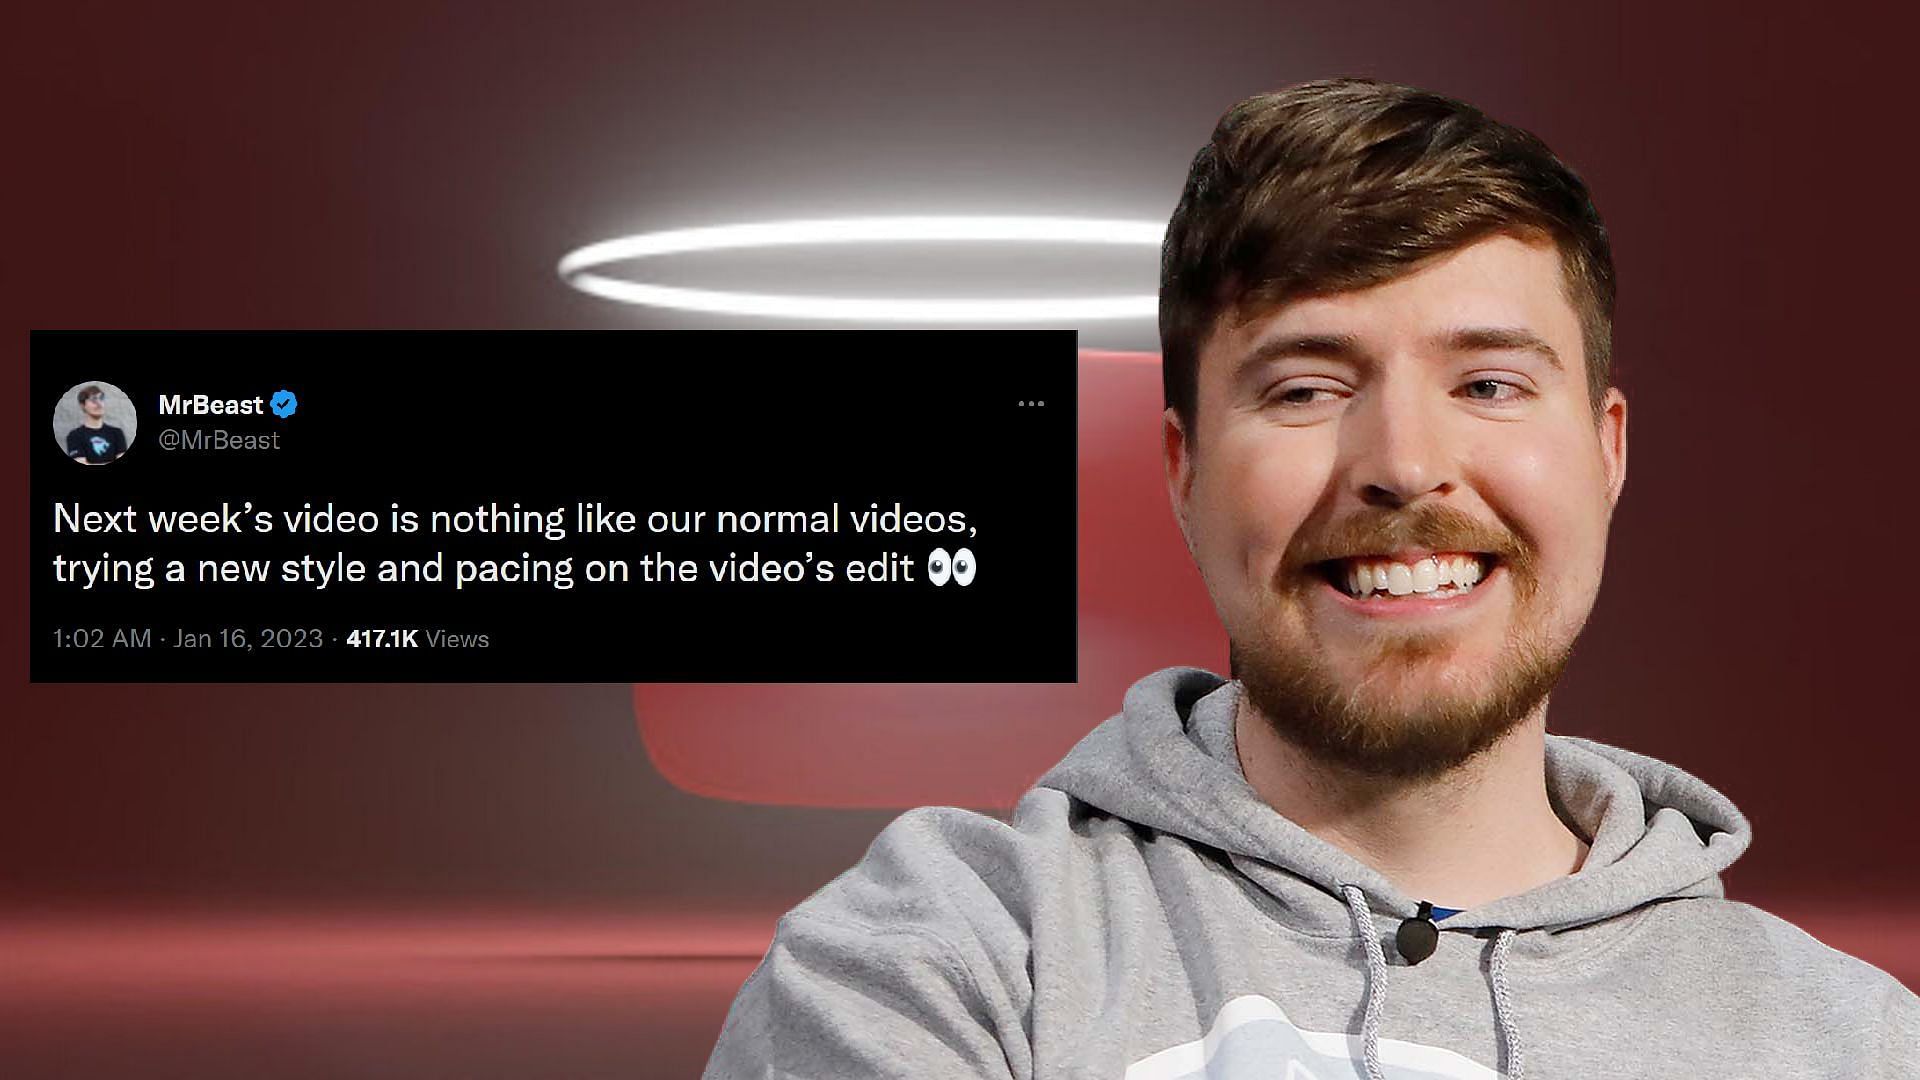 "New style and pacing" MrBeast claims his next video will be quite